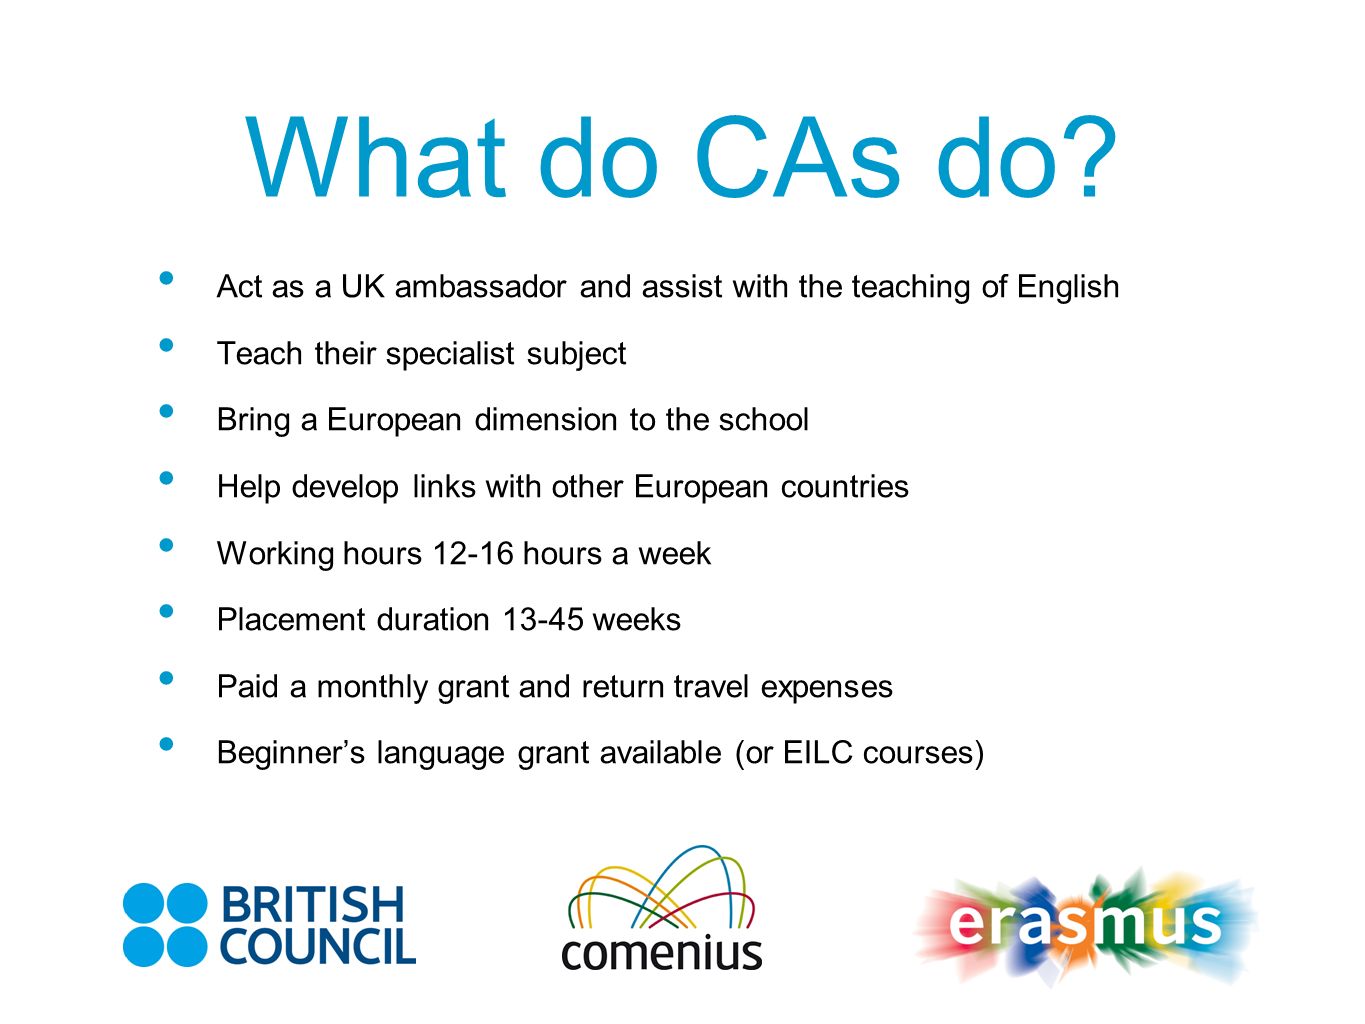 Act as a UK ambassador and assist with the teaching of English Teach their specialist subject Bring a European dimension to the school Help develop links with other European countries Working hours hours a week Placement duration weeks Paid a monthly grant and return travel expenses Beginners language grant available (or EILC courses)